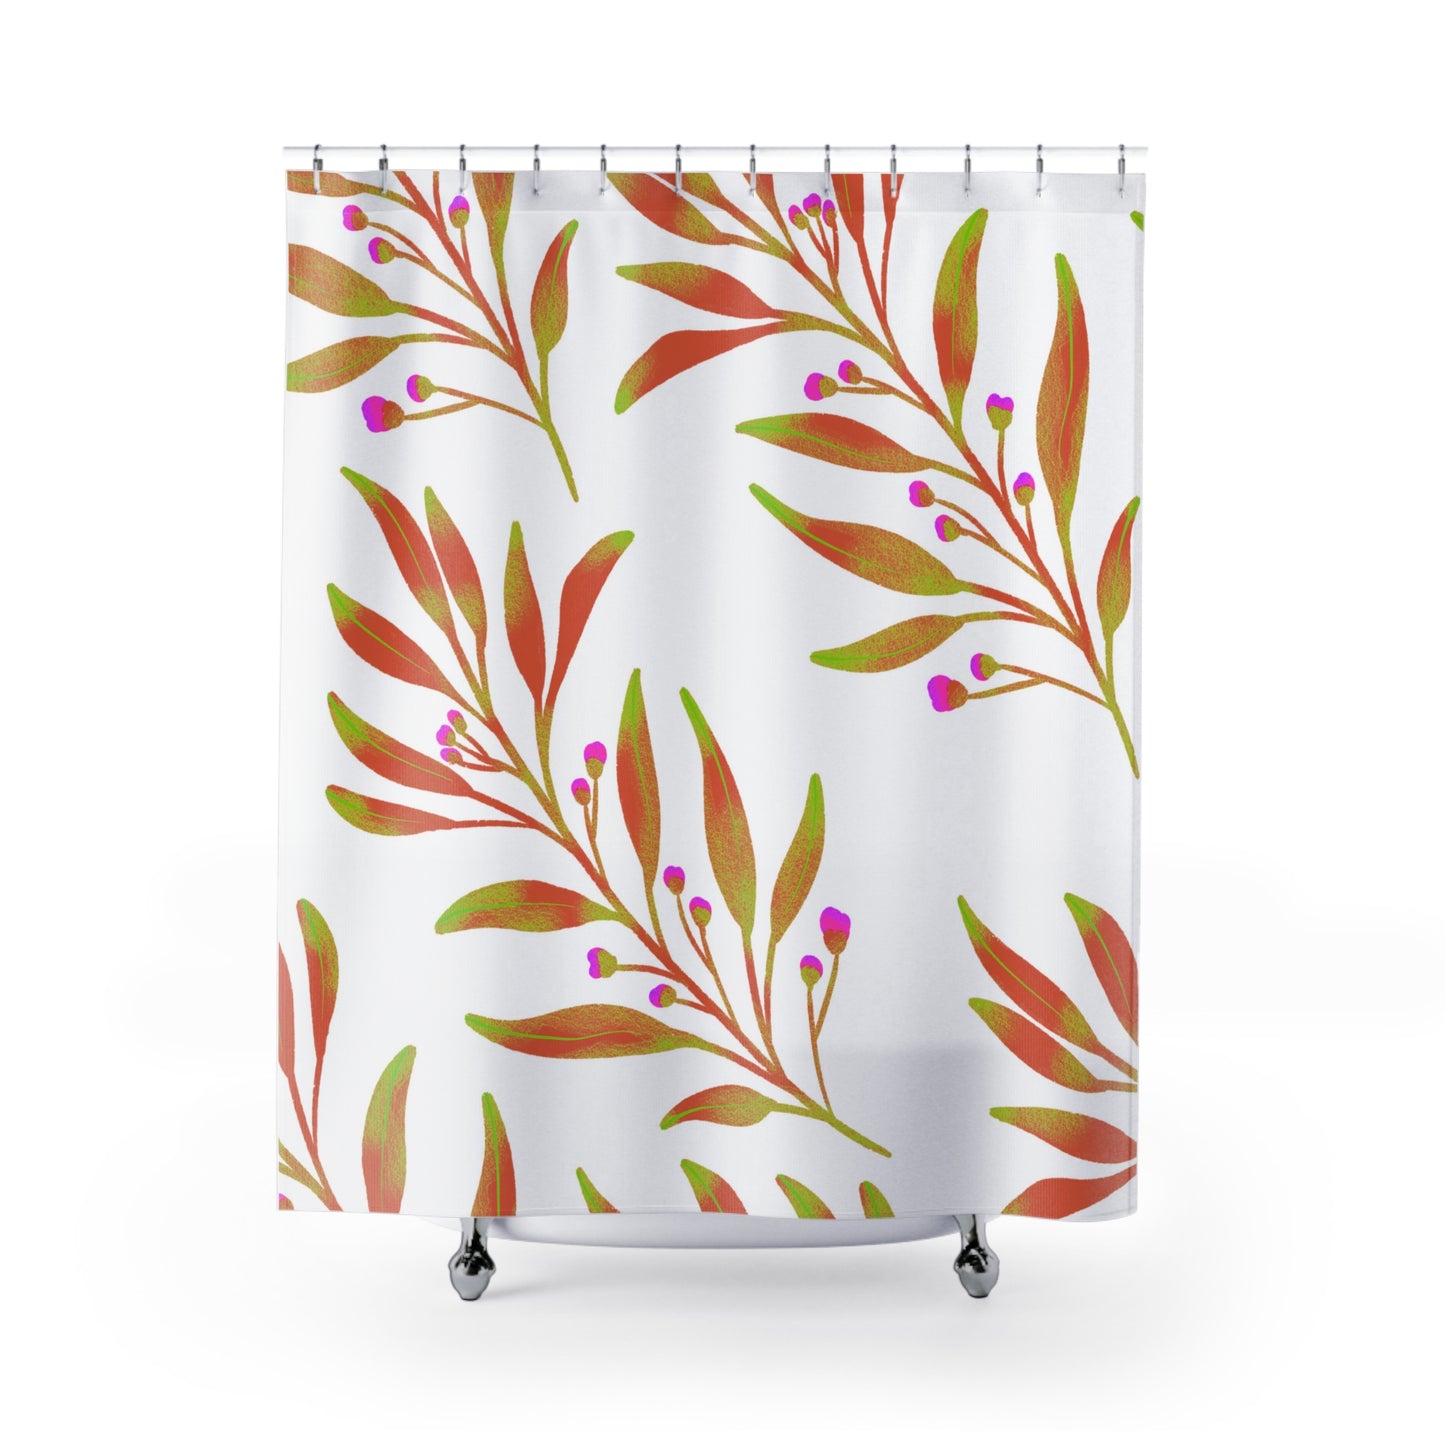 Rusty Leaves Pattern Shower Curtain 71" x 74", White